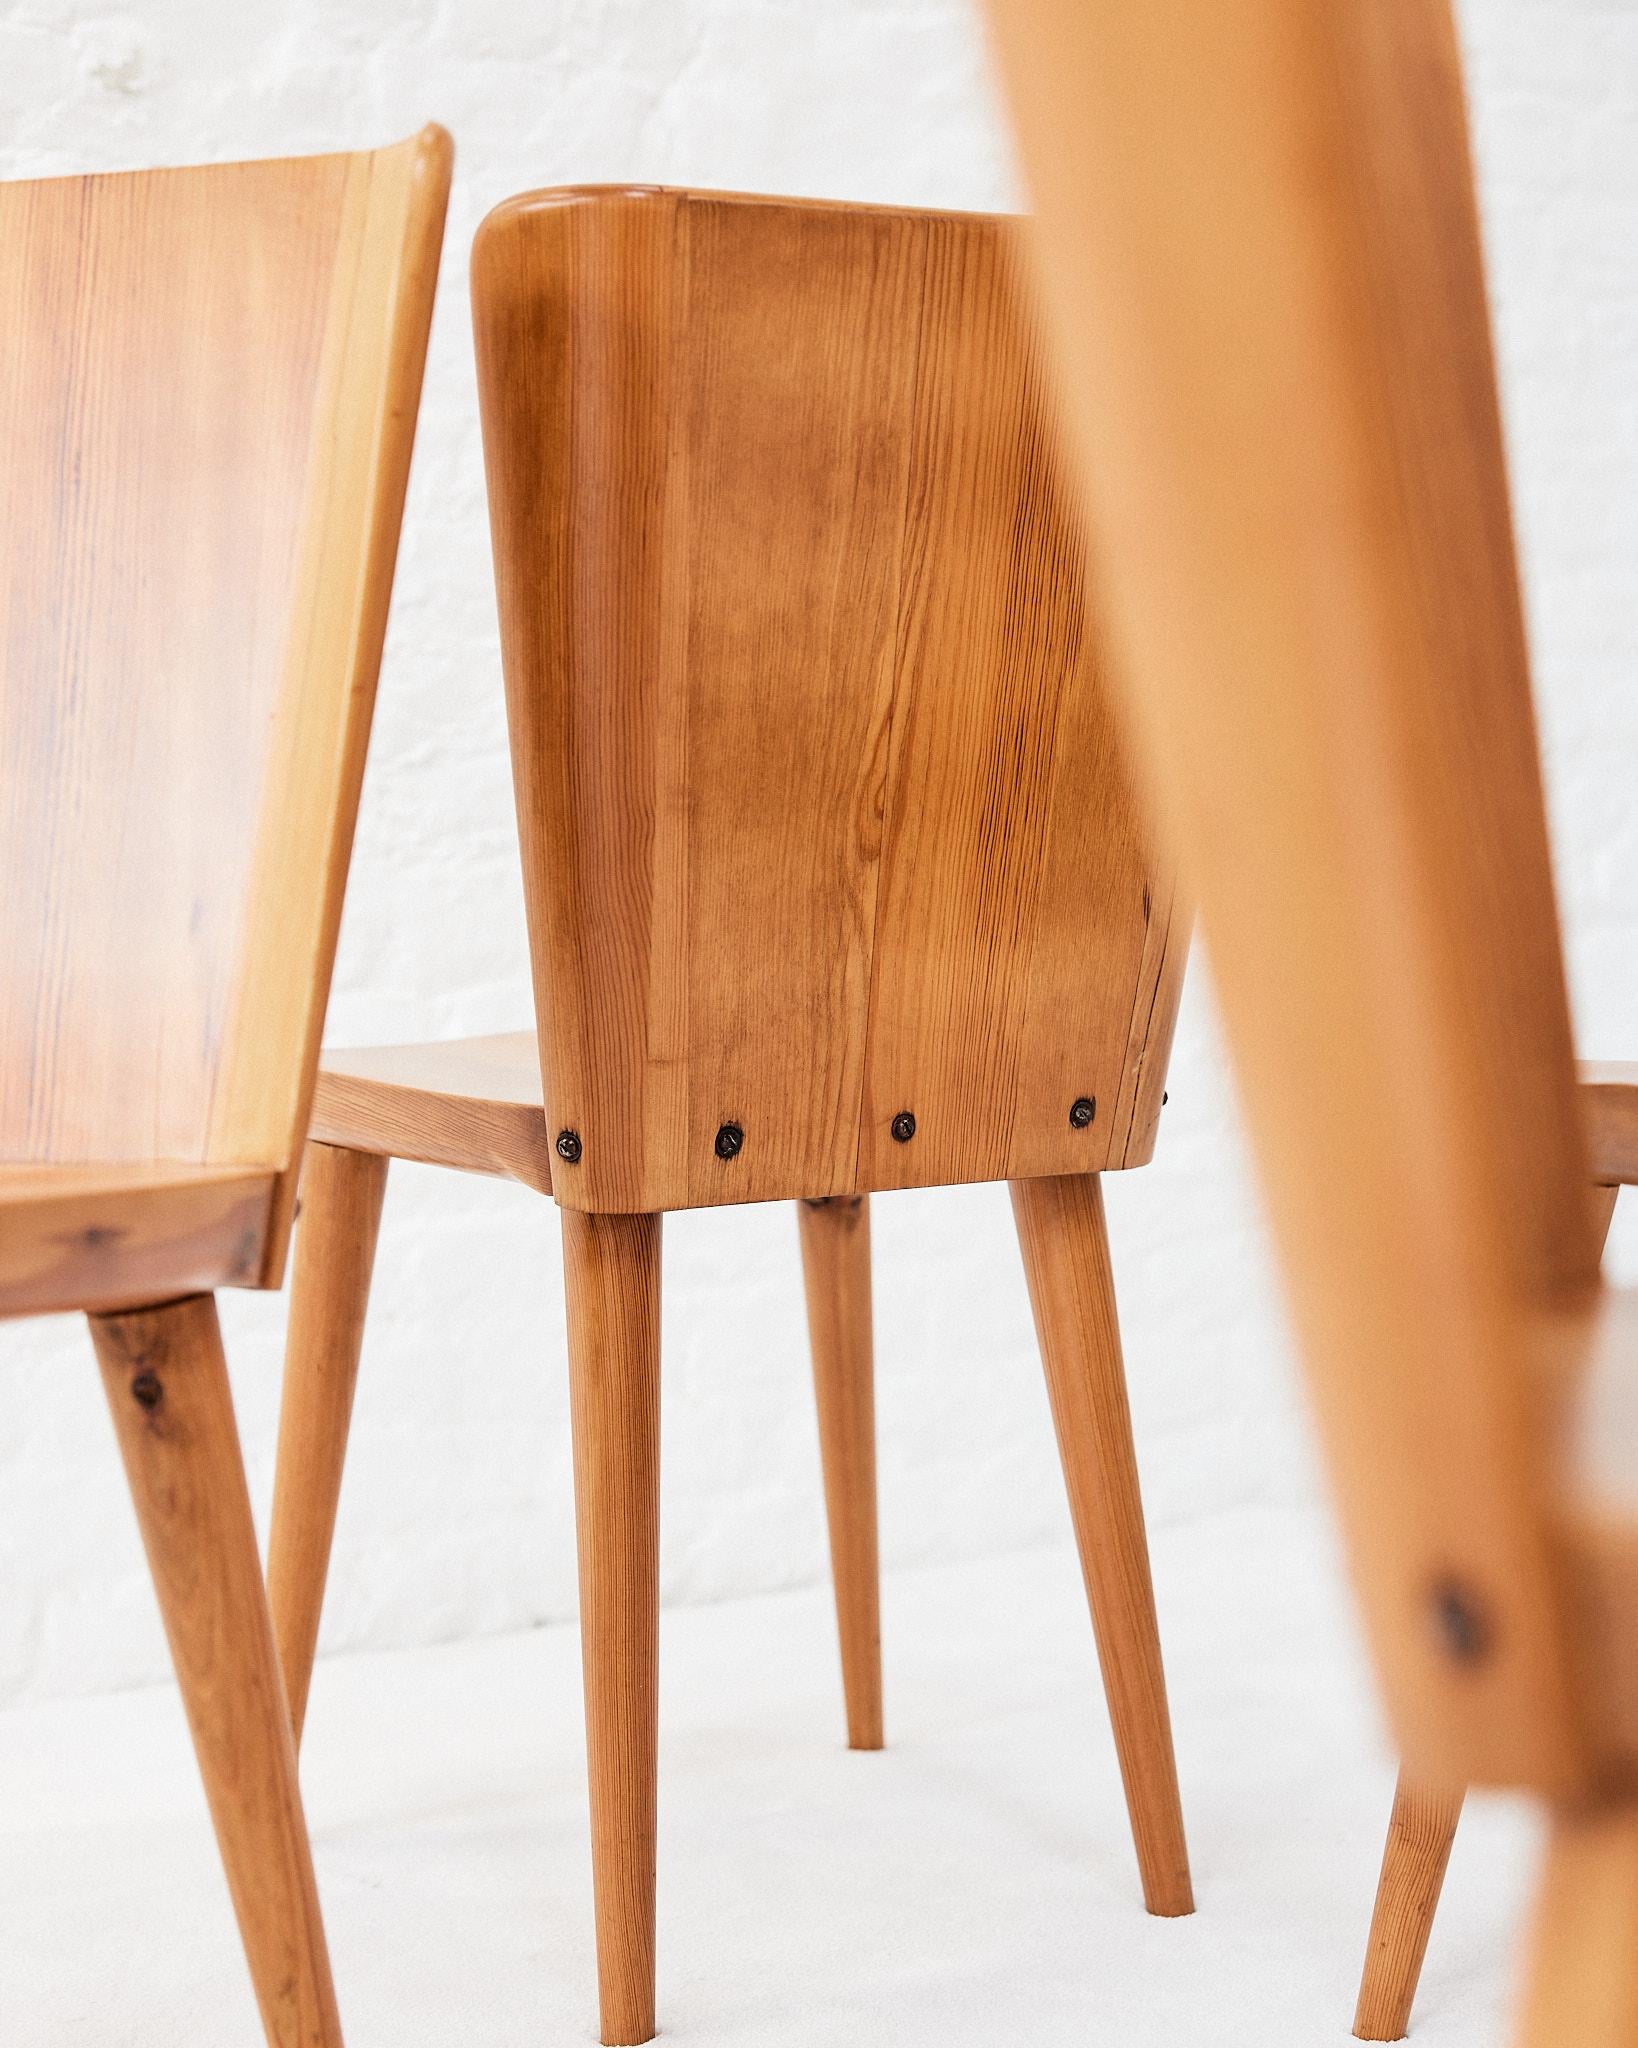 Chairs designed by Goran Malmvall for Karl Anderson & Soner, in the 1950s, with a solid pine seat and base. The backrests run wide near the highest and consist of straight and slightly curved near the ends.
The Swedish dining chairs hold a powerful